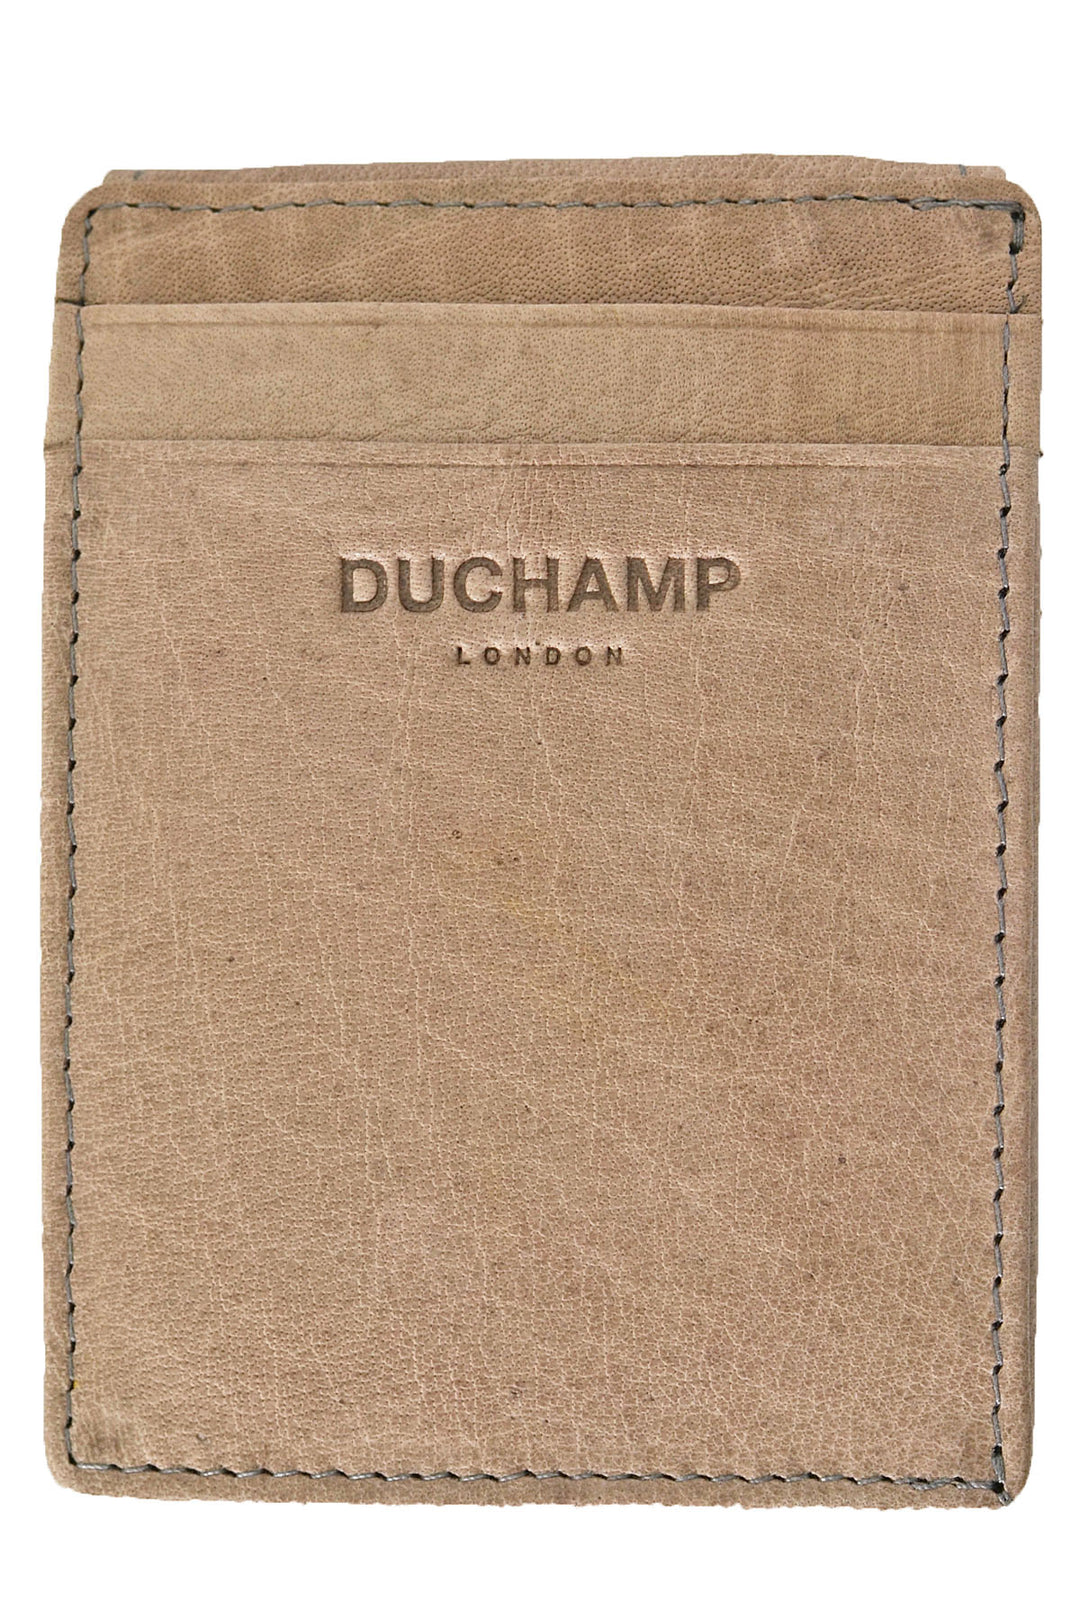 Duchamp Credit Card and ID Wallet